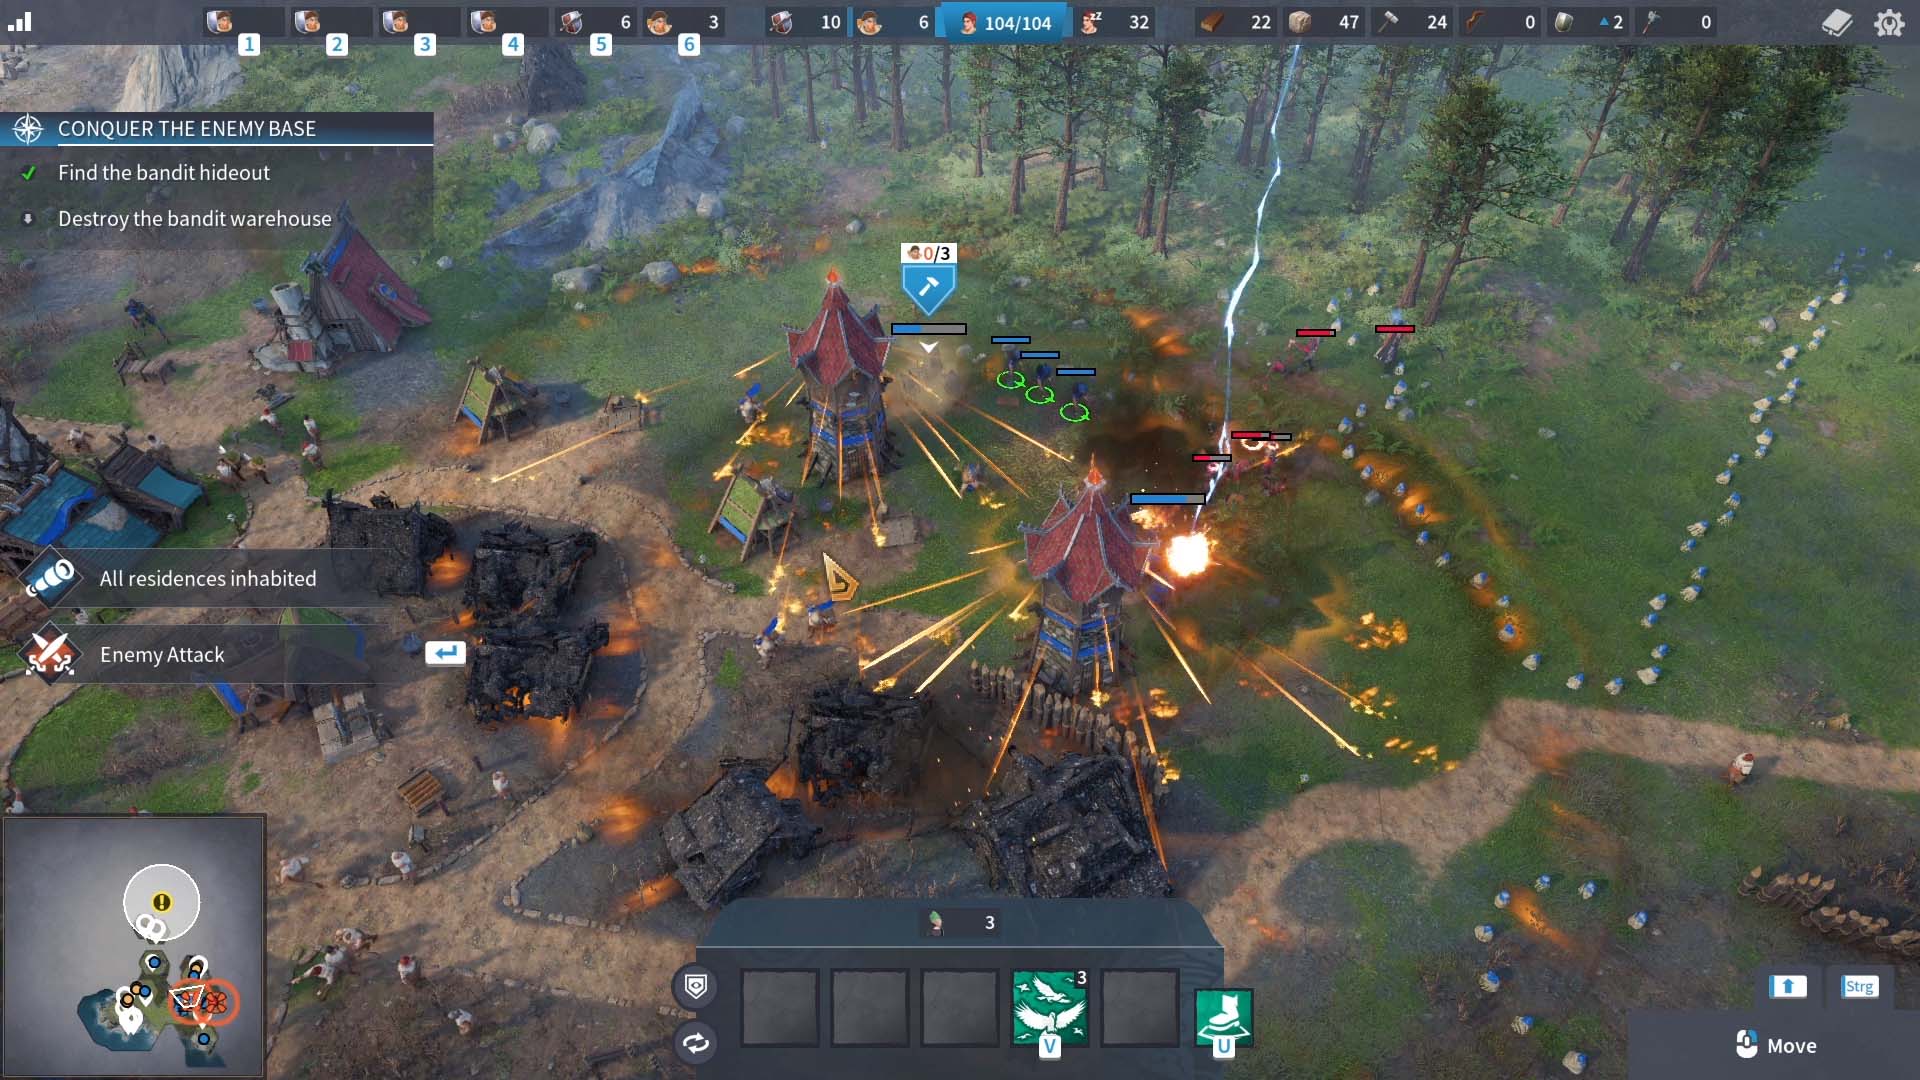 Towers repel invaders in The Settlers: New Allies